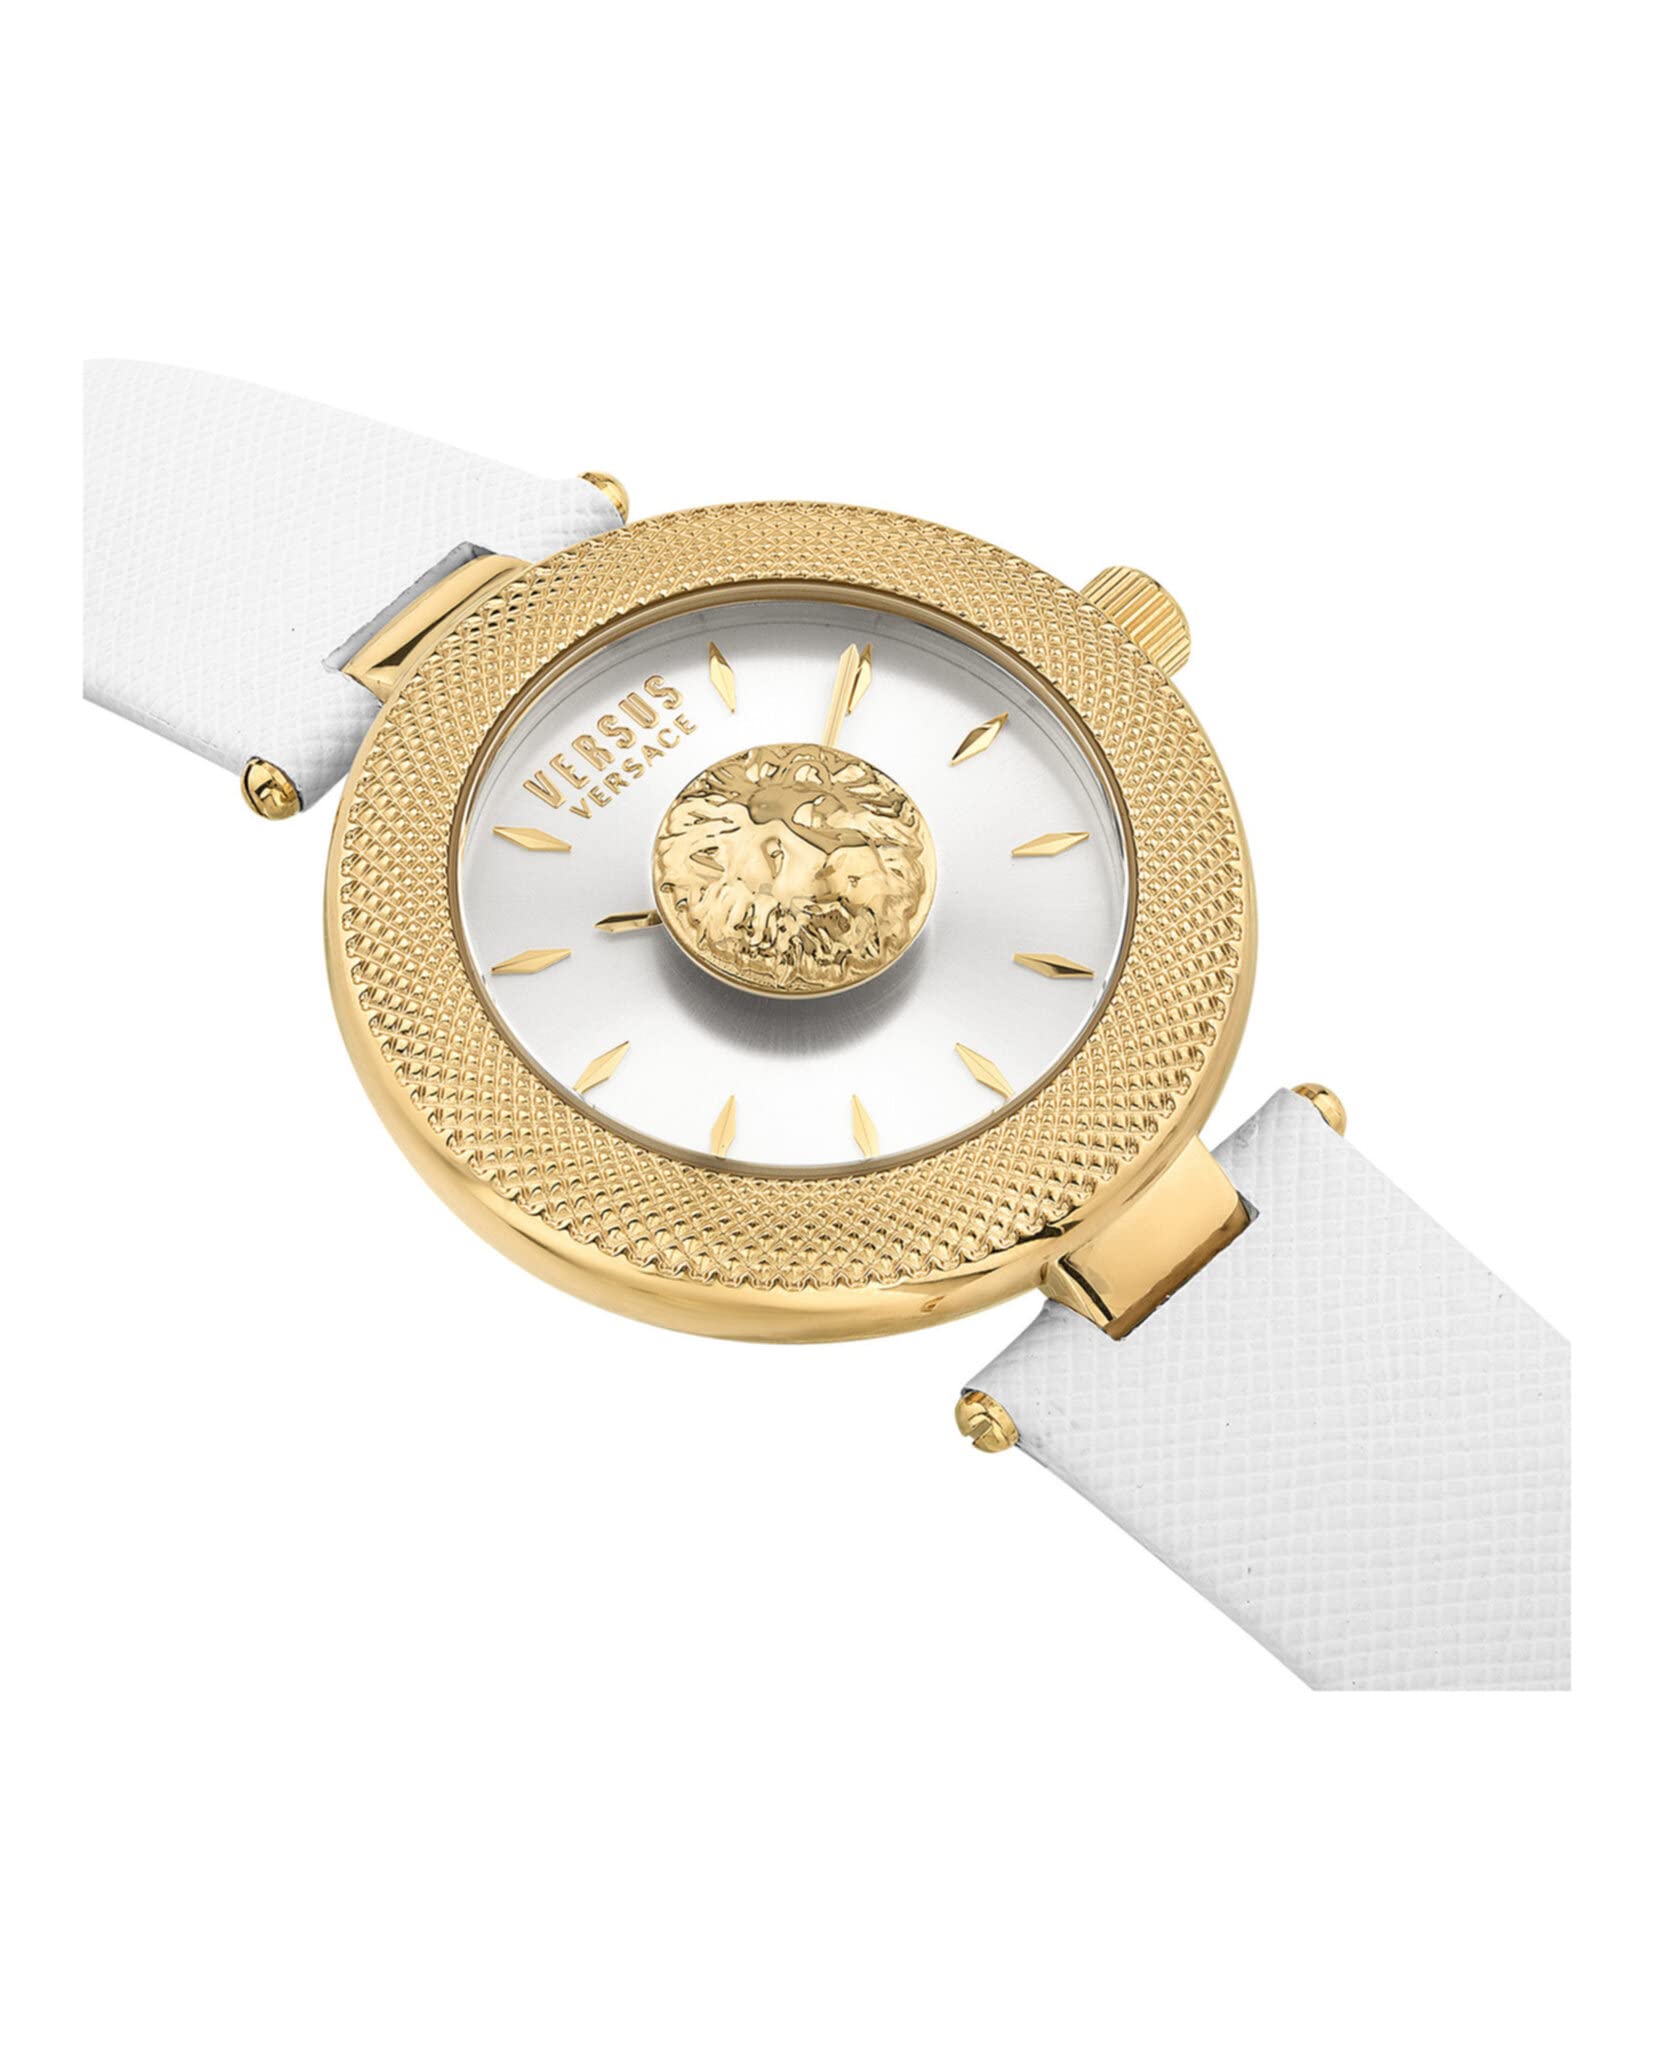 Versus Versace Brick Lane Lion Collection Womens Fashion Watch Featuring Genuine Leather Adjustable Strap and Sunray Dial